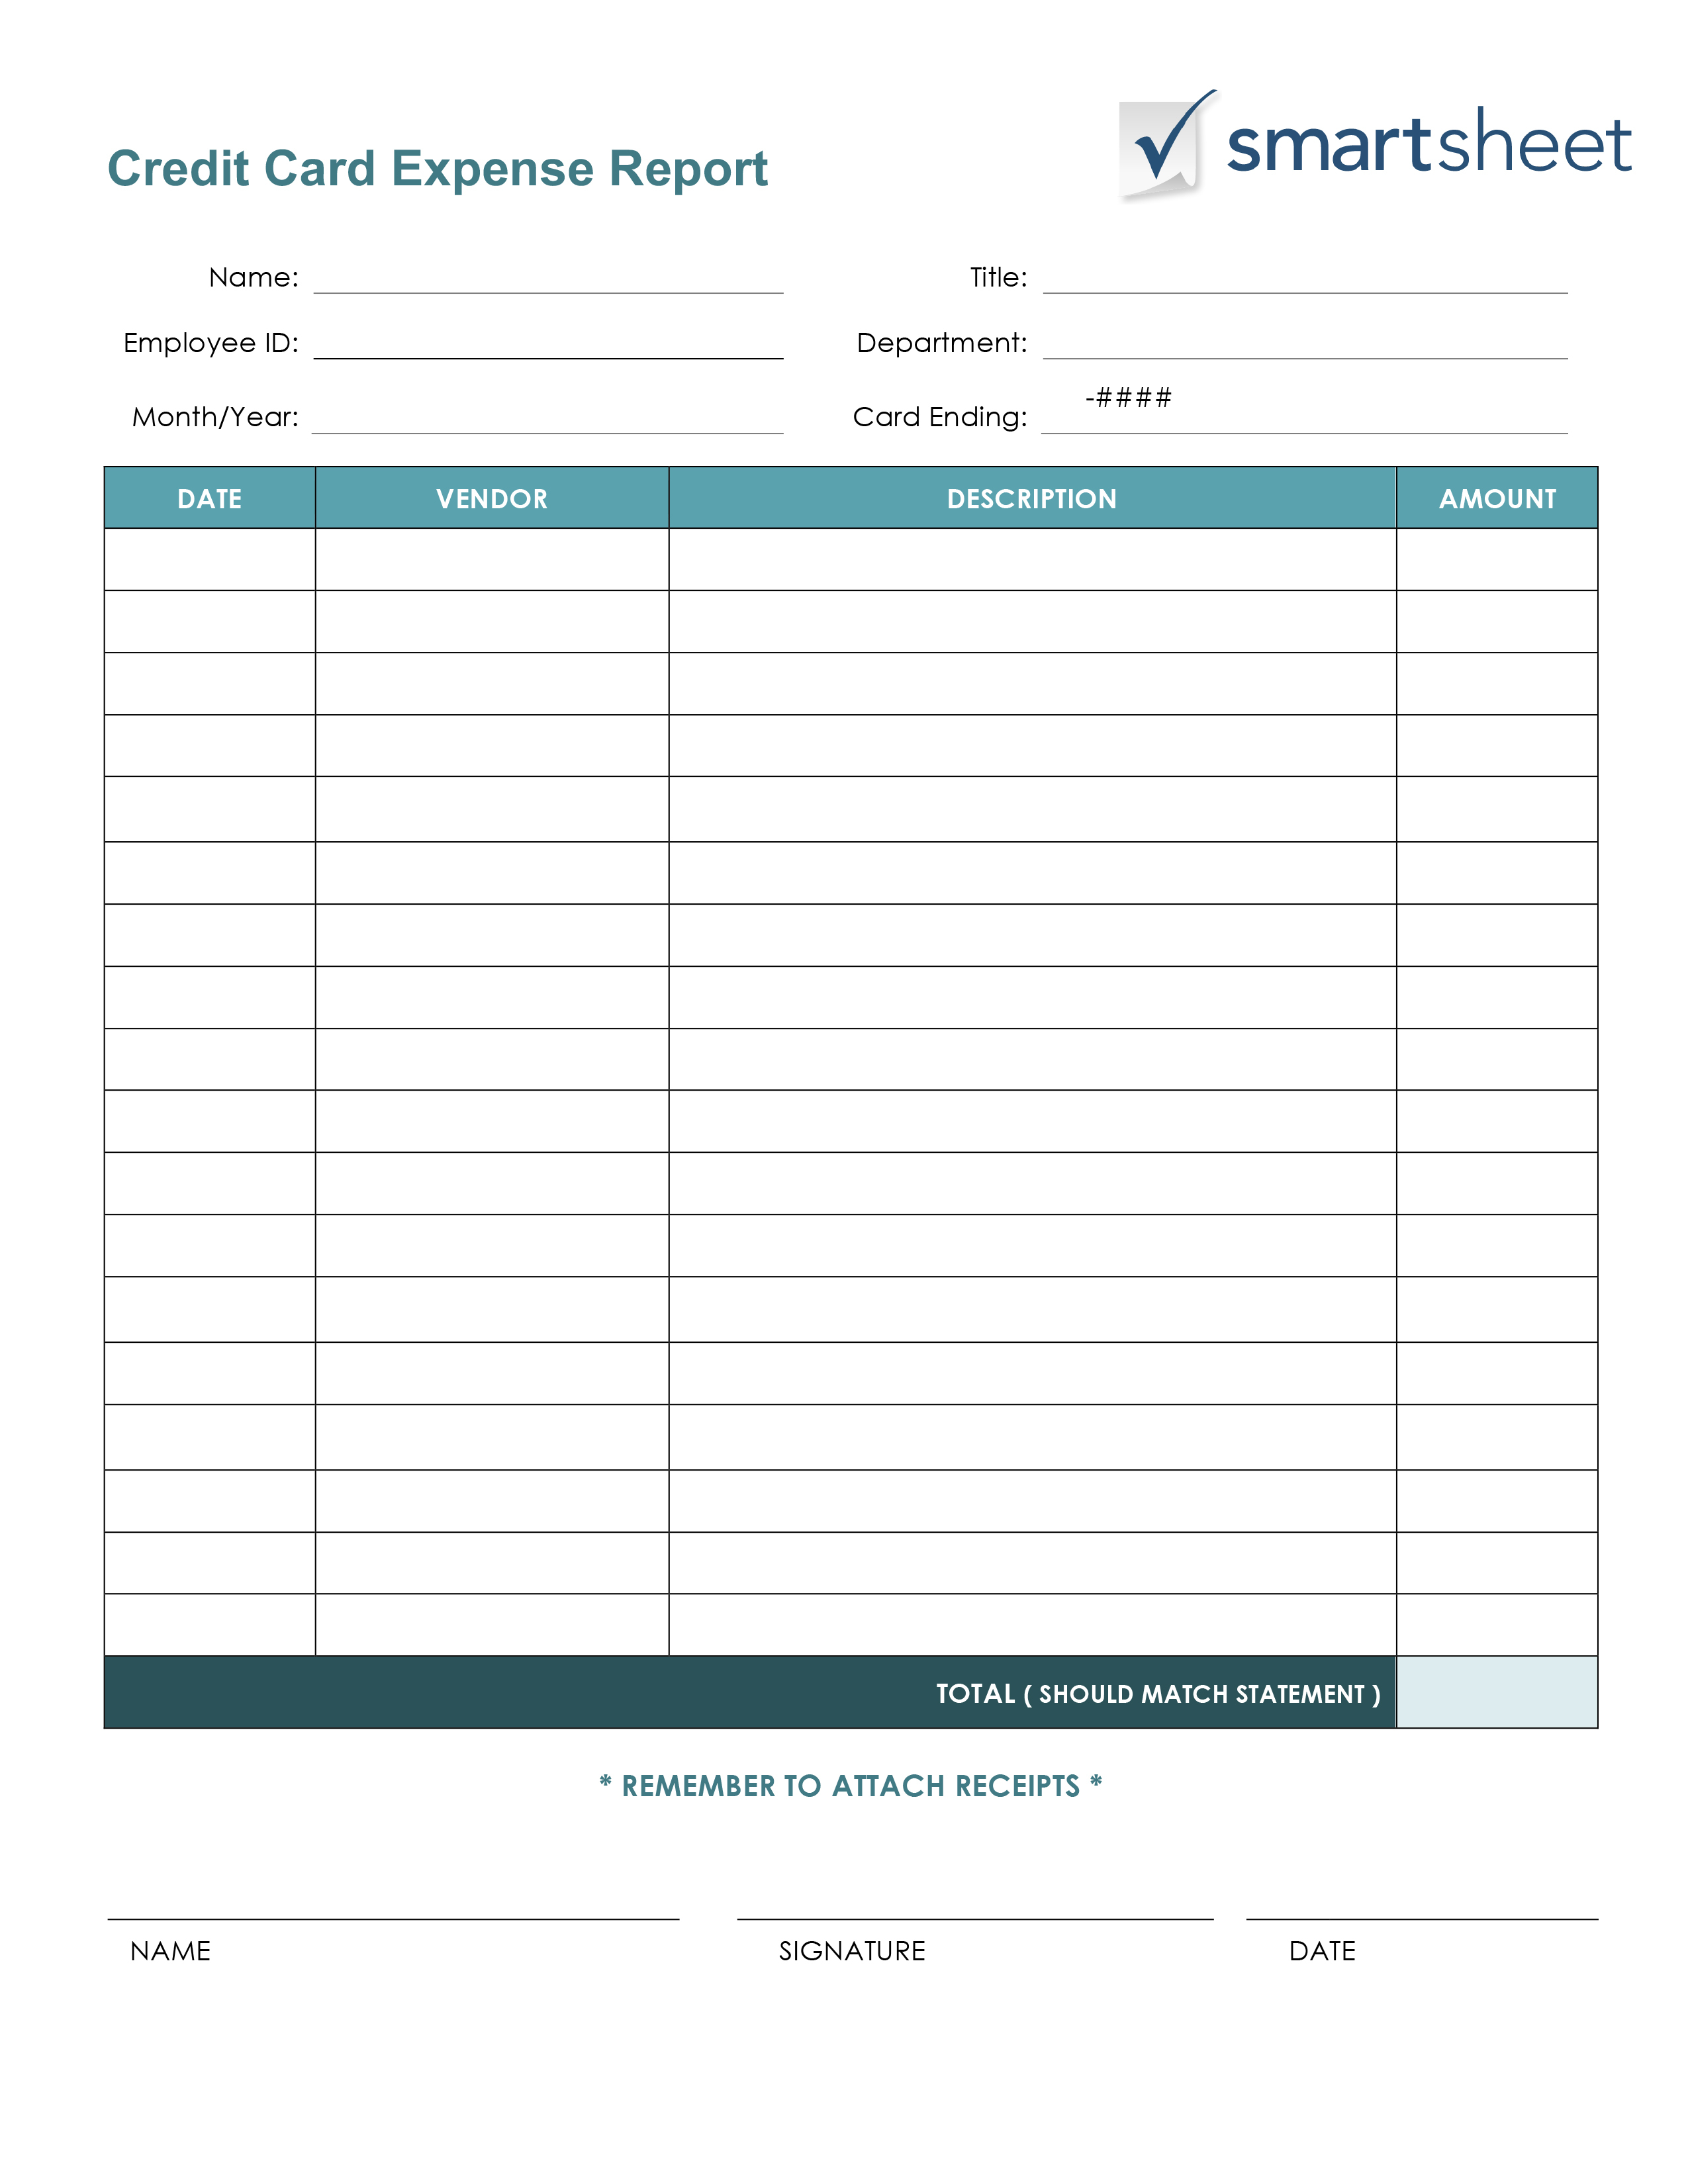 Free Expense Report Templates Smartsheet and Monthly Expenses Spreadsheet For Small Business